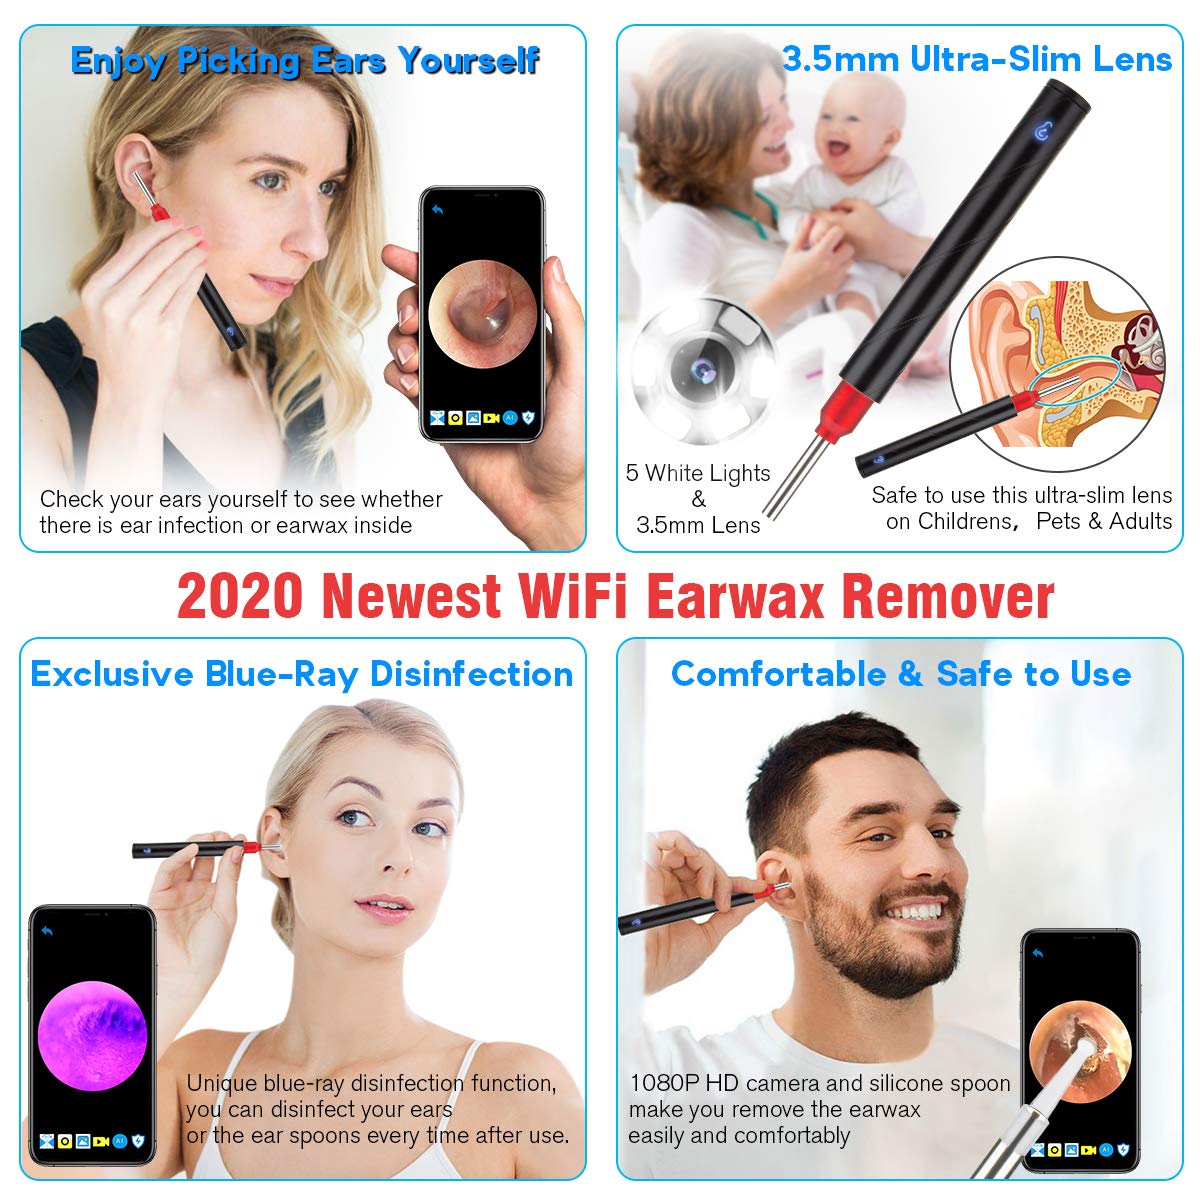 JOYGIFT Ear Wax Remover,Wireless Otoscope Earwax Removal Tool 1080P HD WiFi Ear Endoscope with LED Light,3.5mm Visual Ear Scope Camera Safe Ear Pick Ear Cleaning Endocsope Kit for Adults Kids & Pets